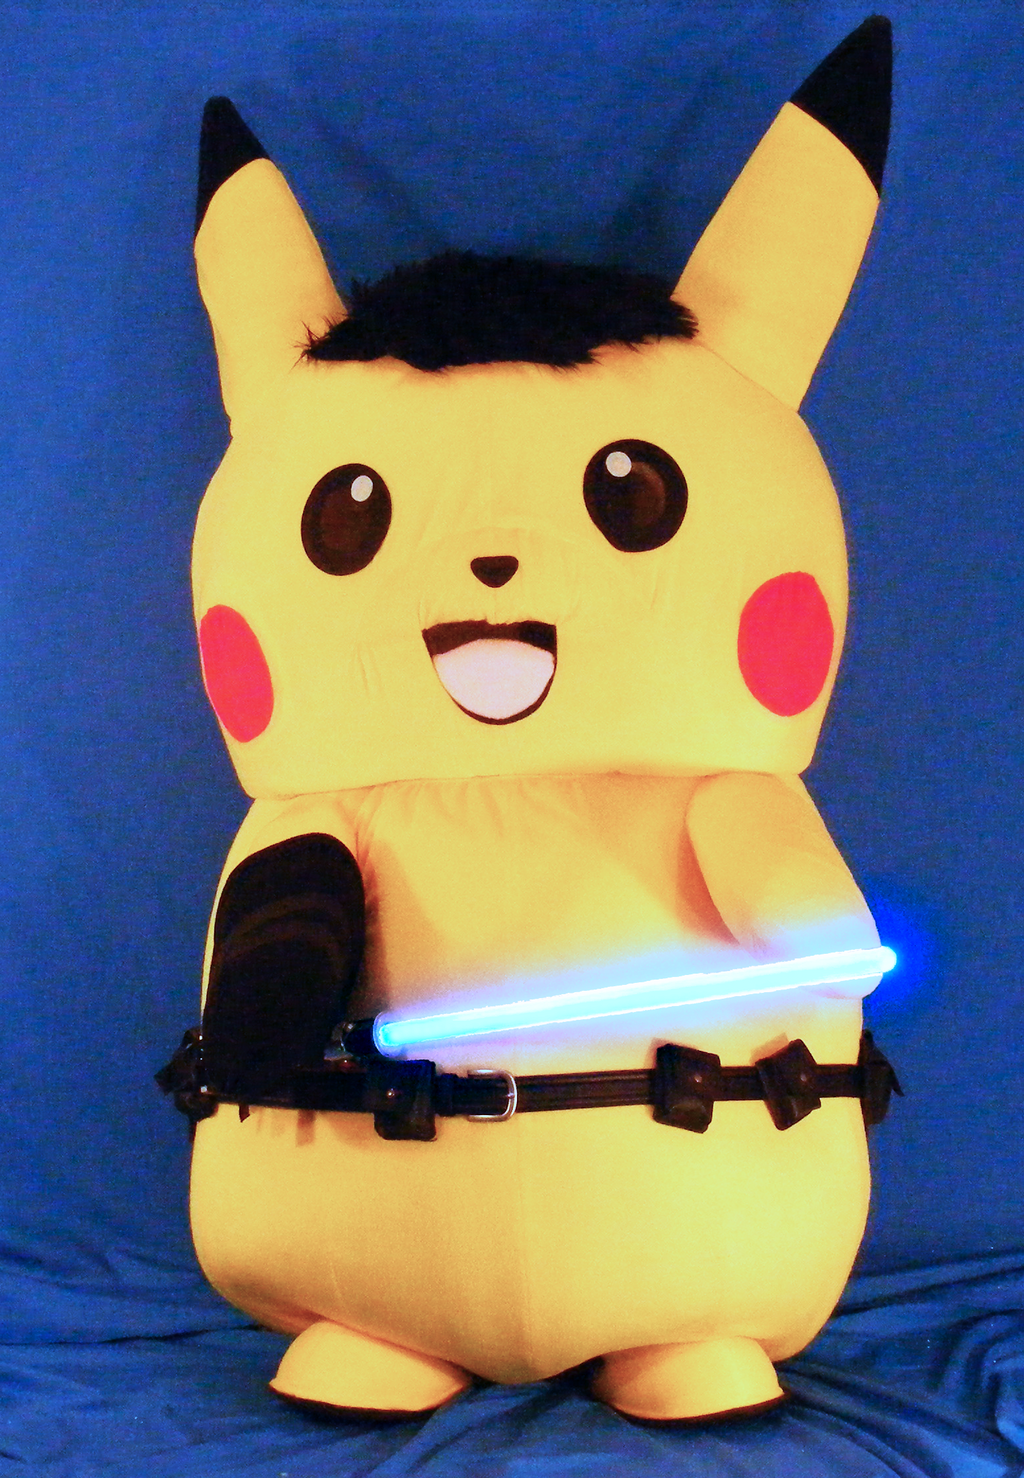 Ace Spade the Pikachu (Mascot Suit) with his Lightsaber